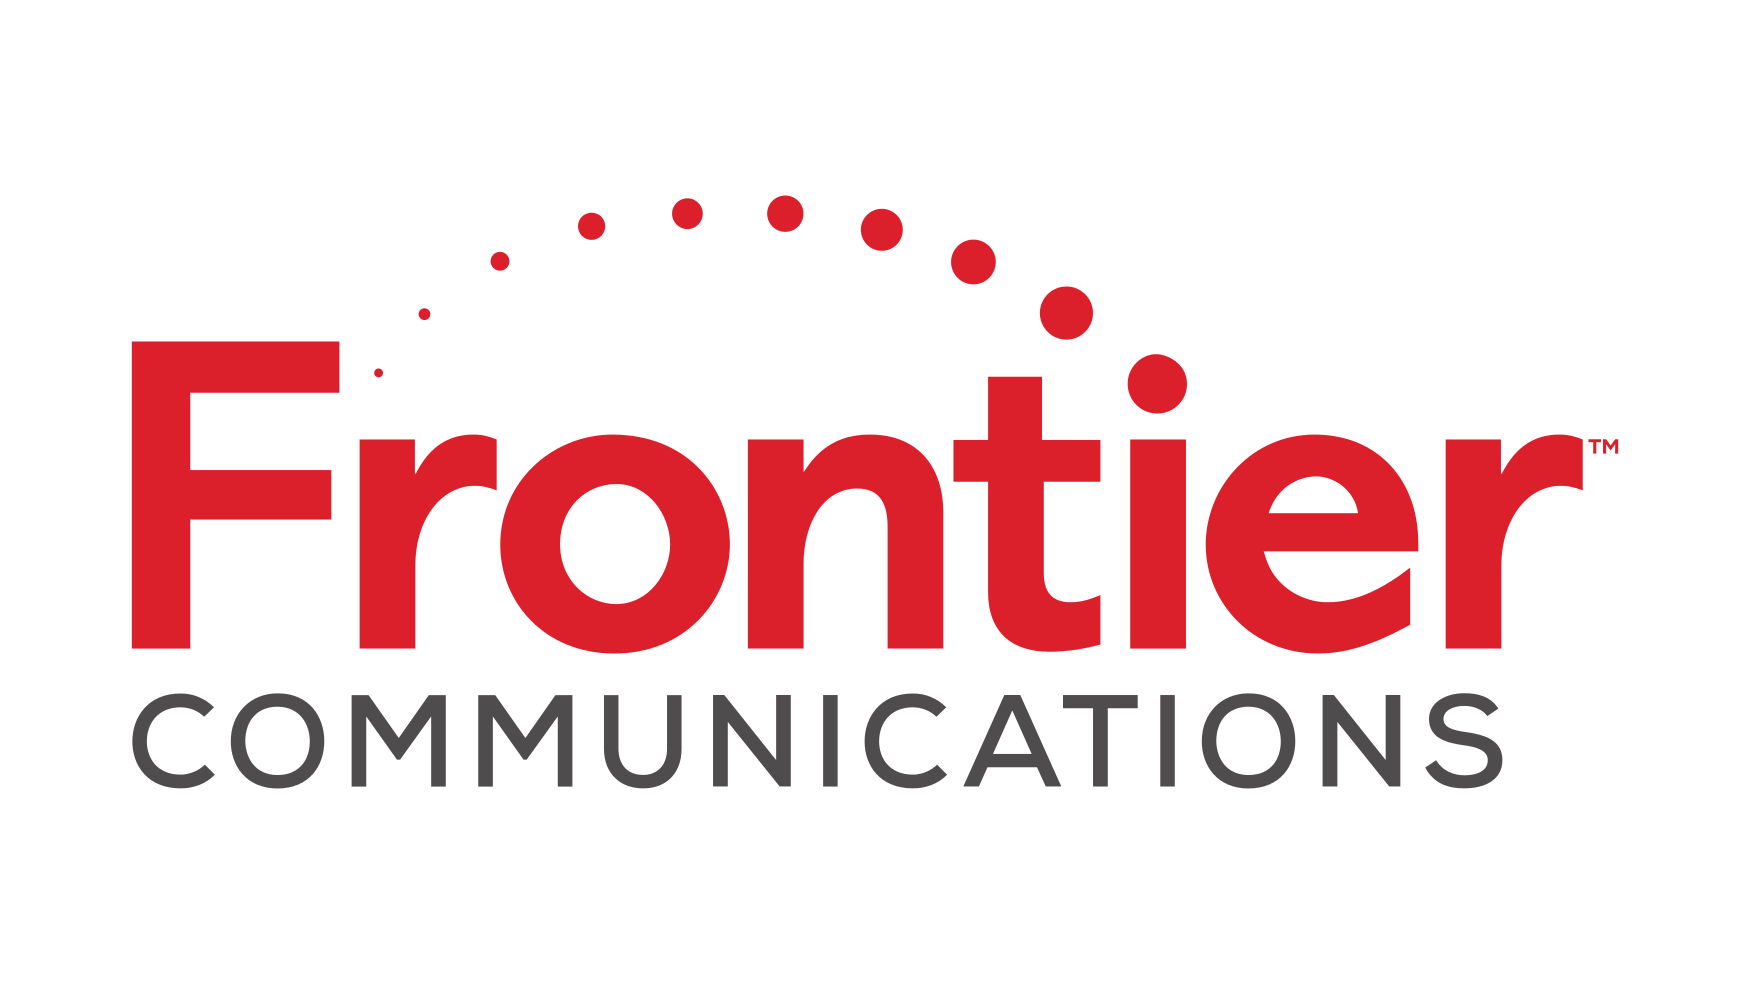 Logo of Frontier Communications